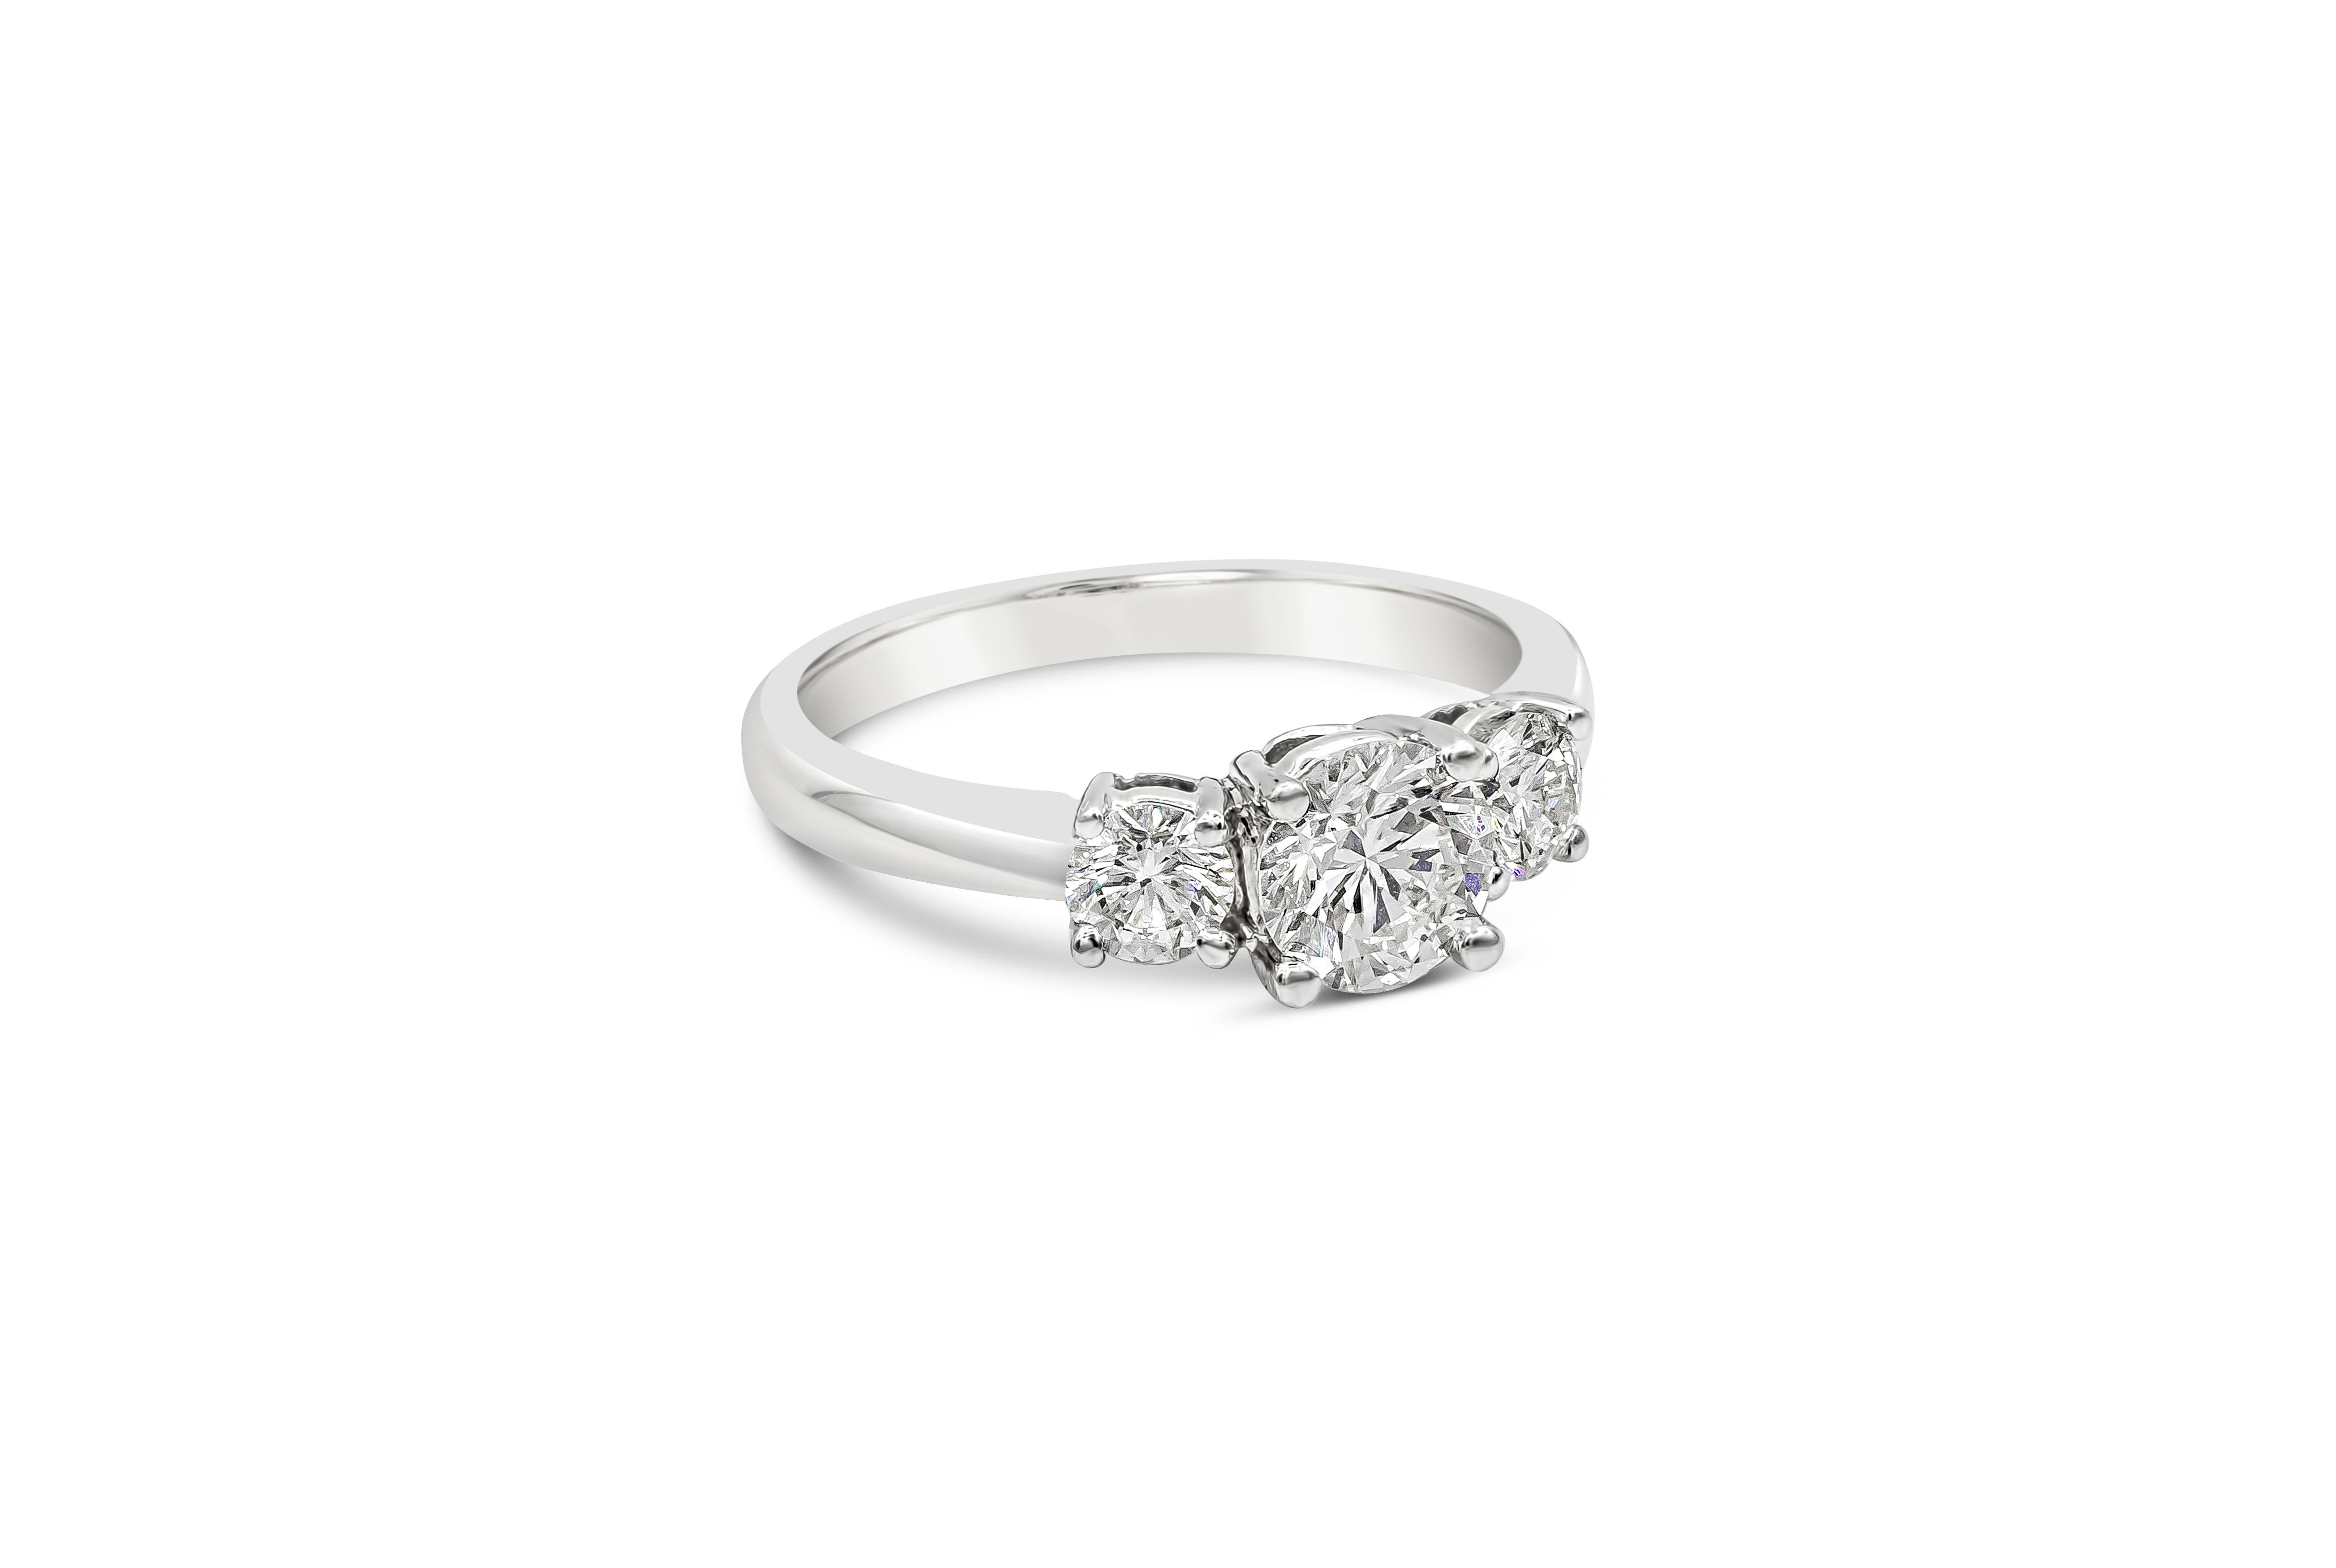 A classic engagement ring style showcasing a 0.70 carat round brilliant diamond, flanked by brilliant round diamonds on either side. Accent diamonds weigh 0.45 carats total. Set in a polished platinum mounting. 

Style available in different price